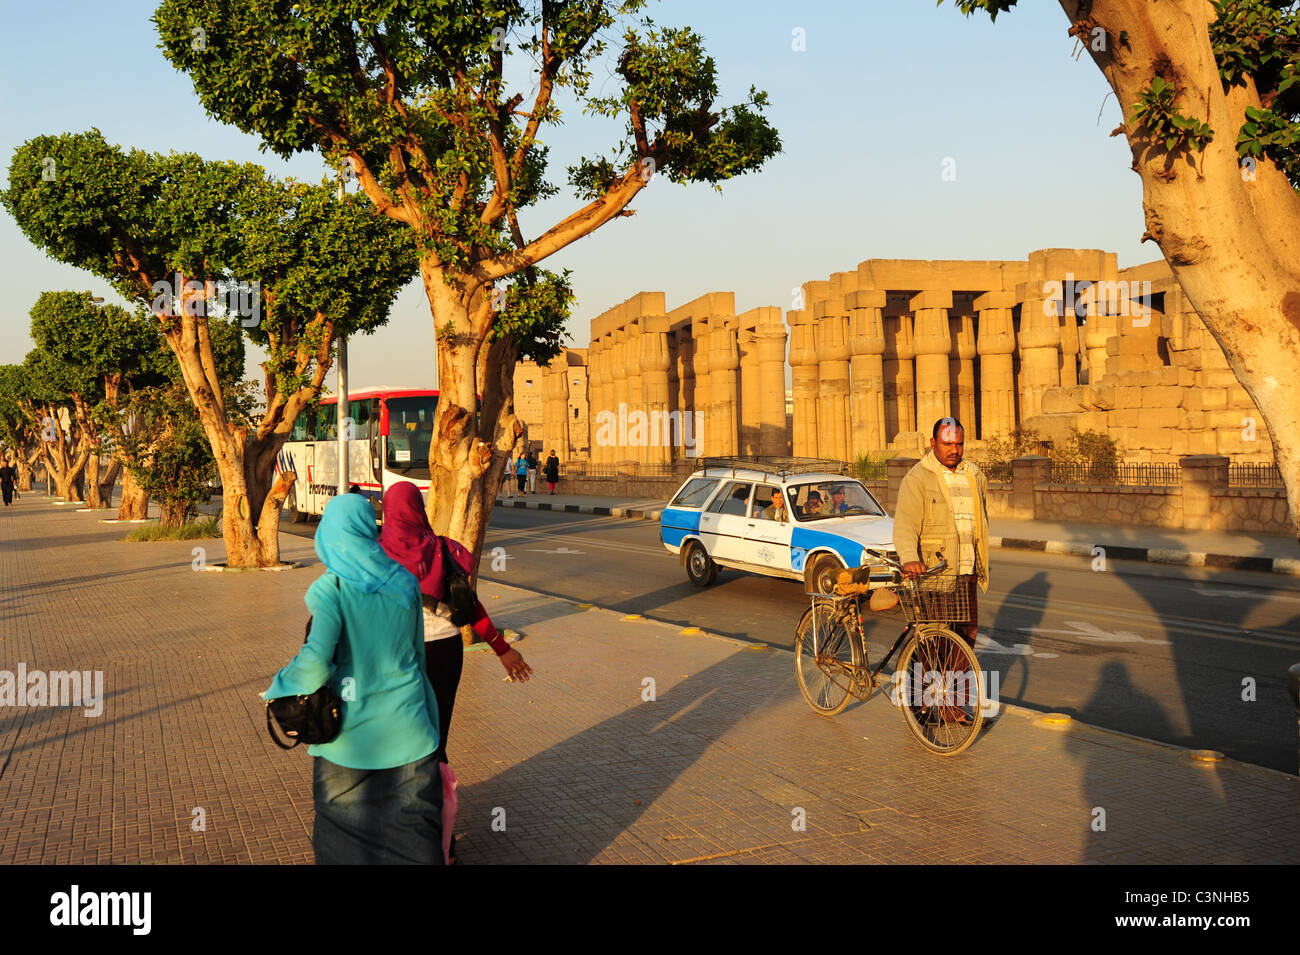 Africa Middle East Egypt Egyptian Luxor Temple of Karnak people buses and taxis pass by the ancient antiquties Stock Photo